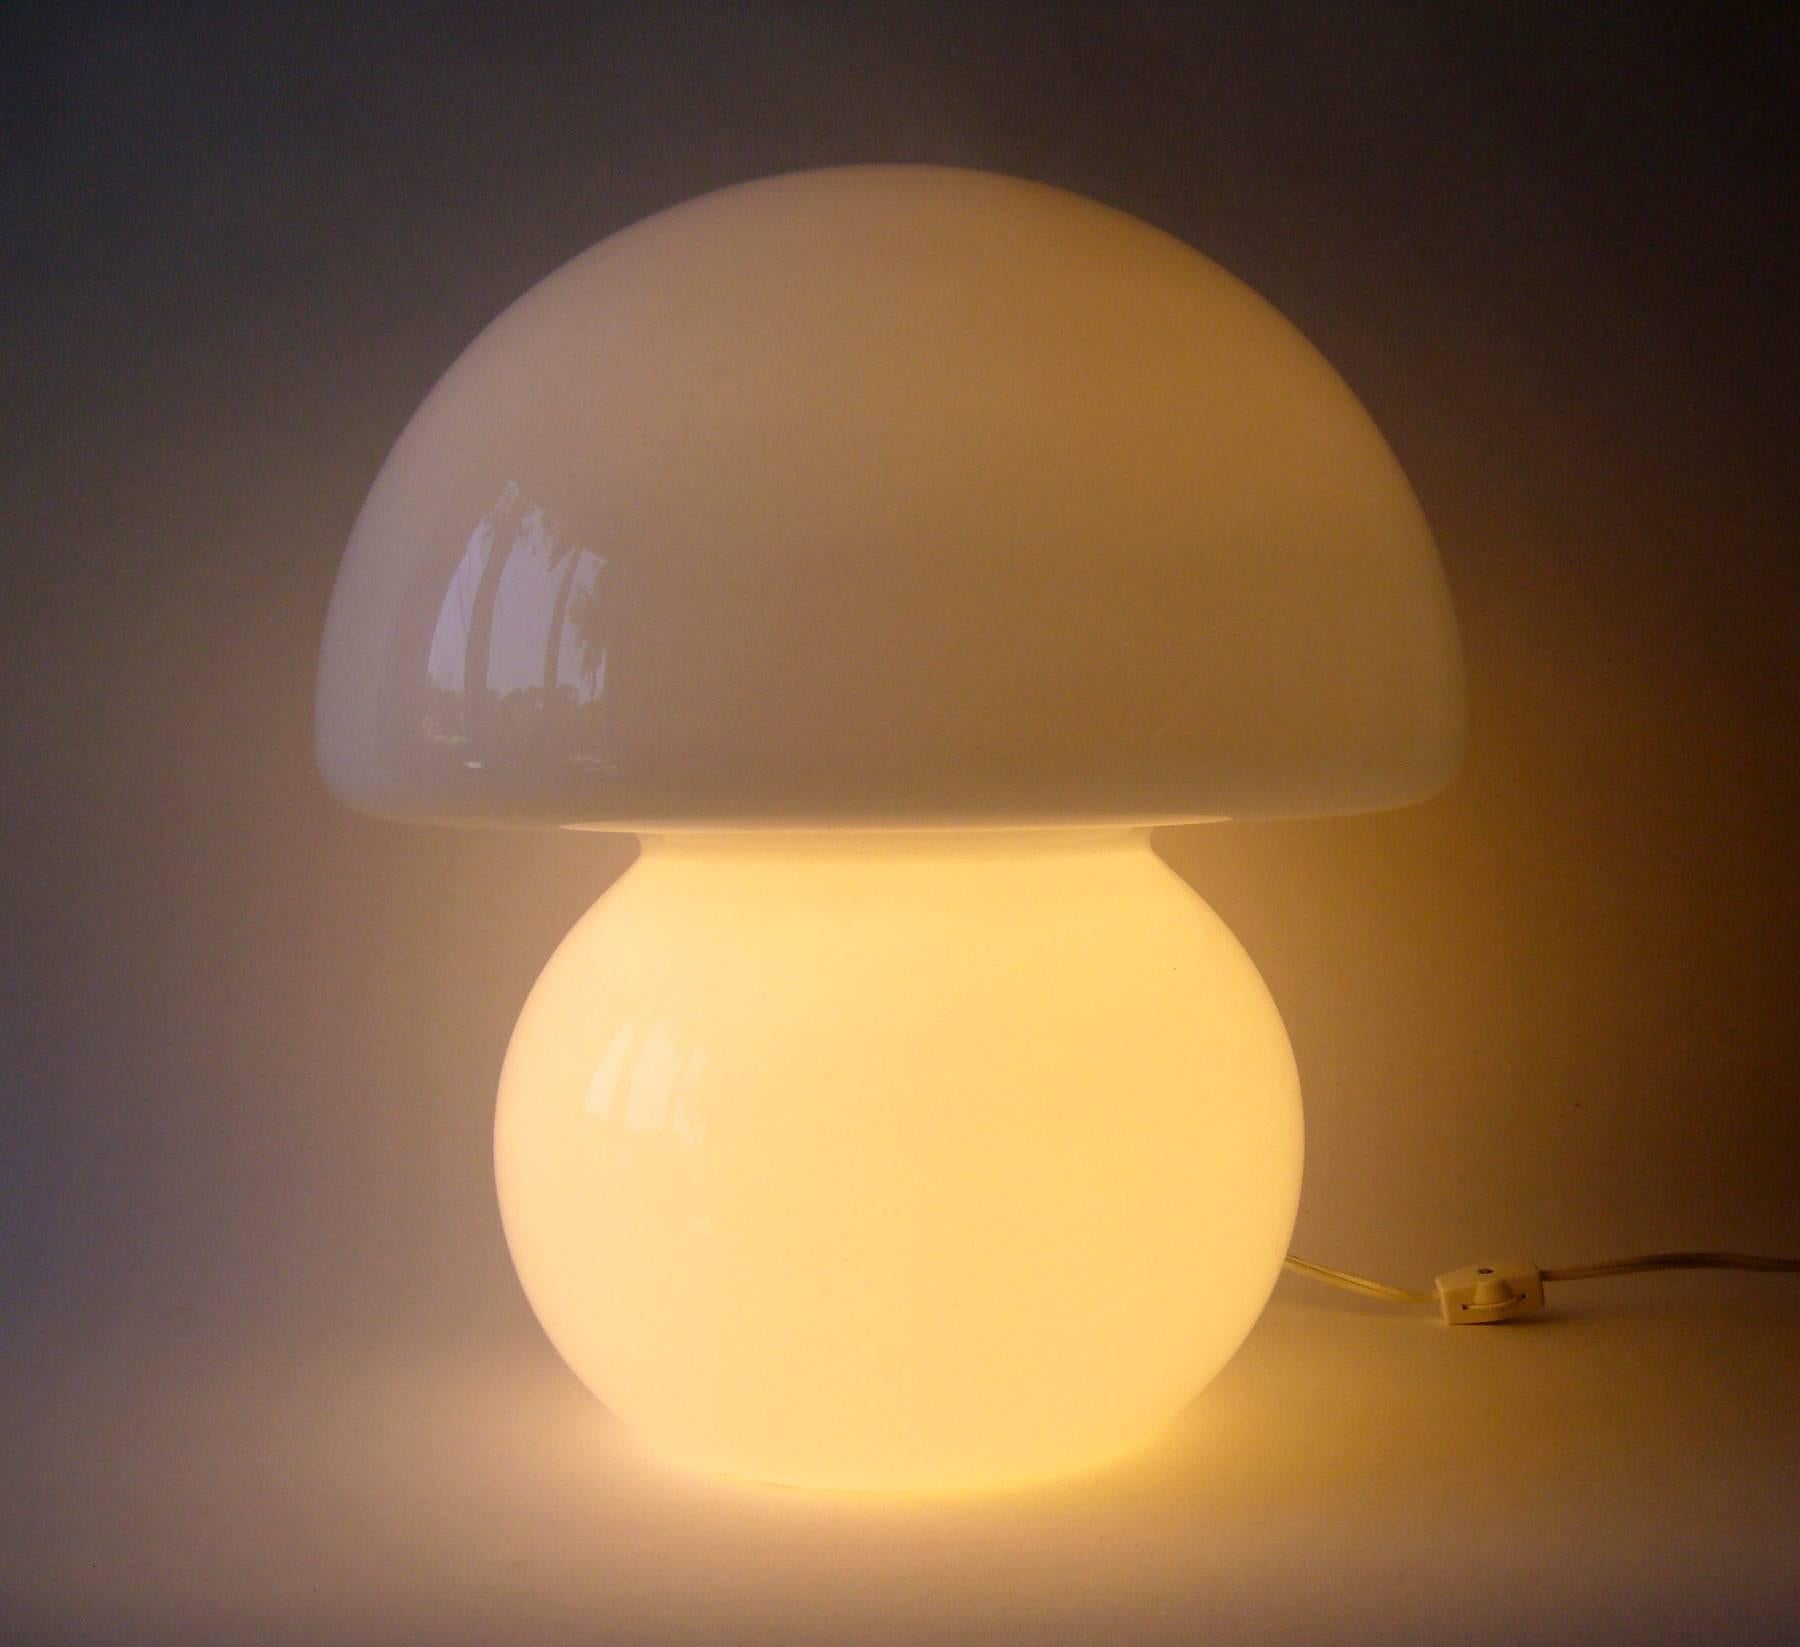 Molded glass lamp, possibly made by the lighting company, Vitri. Lamp measures 14.5" x 13" and has one socket for soft lighting on bottom portion. In very good vintage condition. Unsigned.